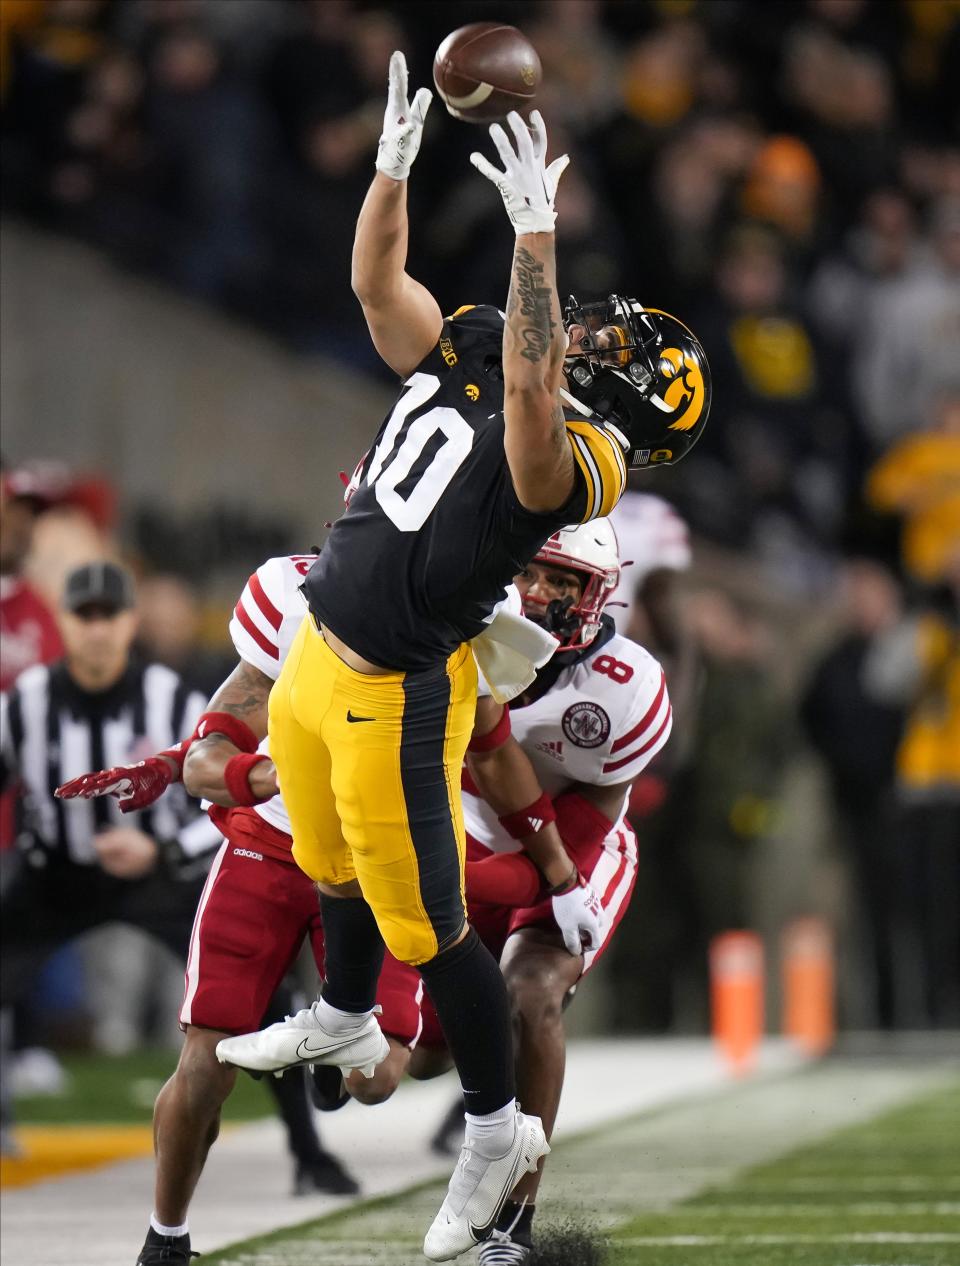 Former Iowa receiver Arland Bruce IV should slide into a regular role as the second slot receiver at Oklahoma State.